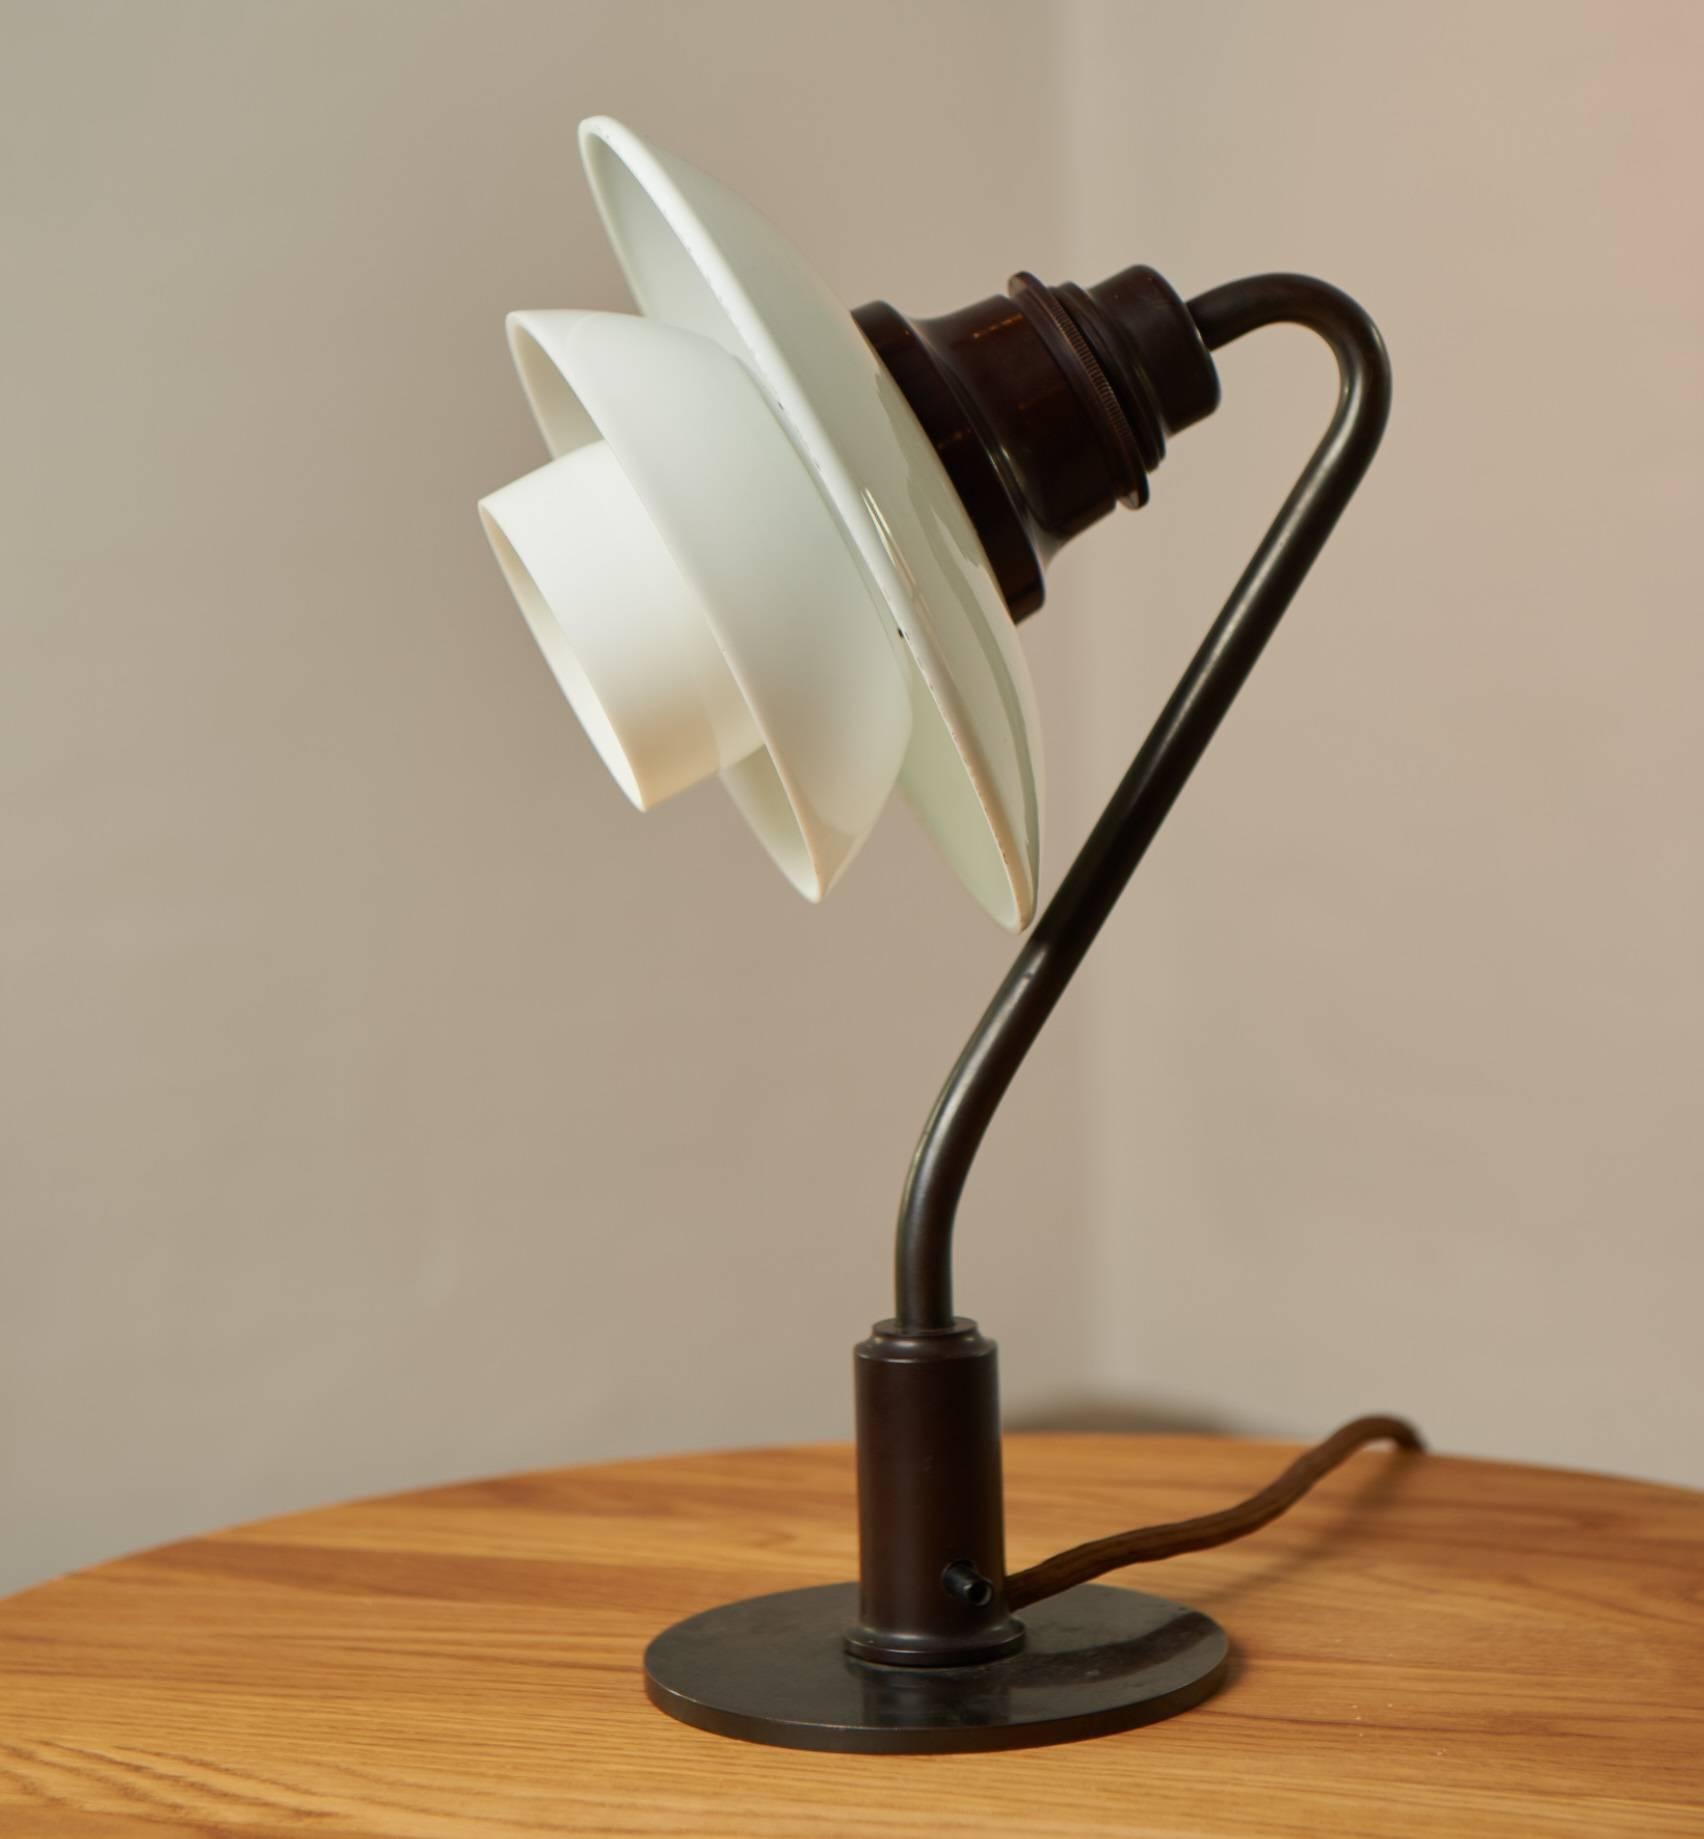 Poul Henningsen PH 2/2 snowdrop table lamp from the 1930s and appears 100% original.

The screens are in one-layer opal glass and the lamp is with circuit breaker.

The lamp is stamped 